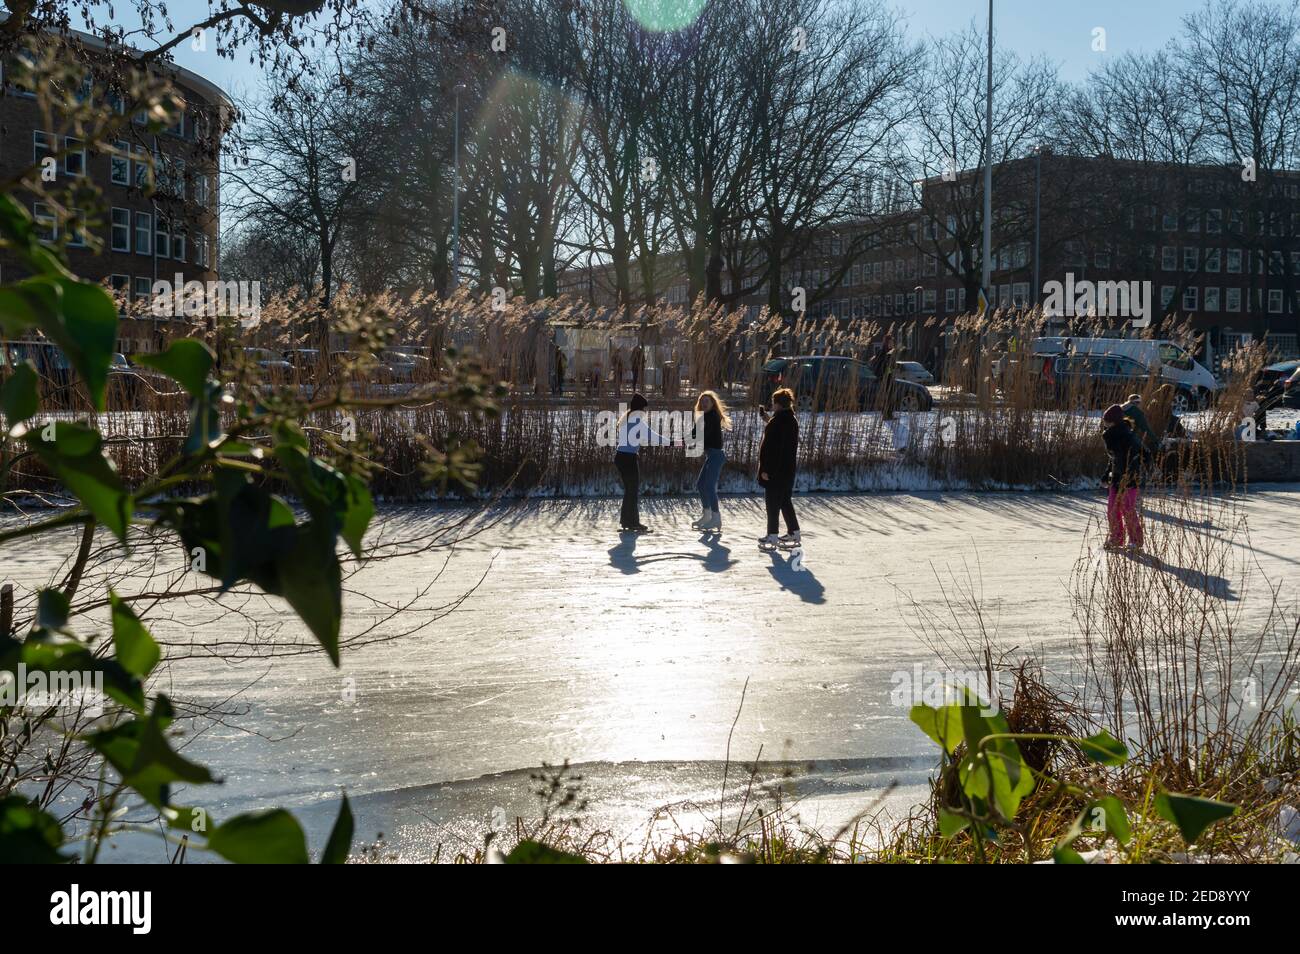 AMSTERDAM, THE NETHERLANDS, FEBRUARY 13,2021.Two girls ice skating on the canals of Amsterdam West, The Netherlands, in the late afternoon sun while a Stock Photo